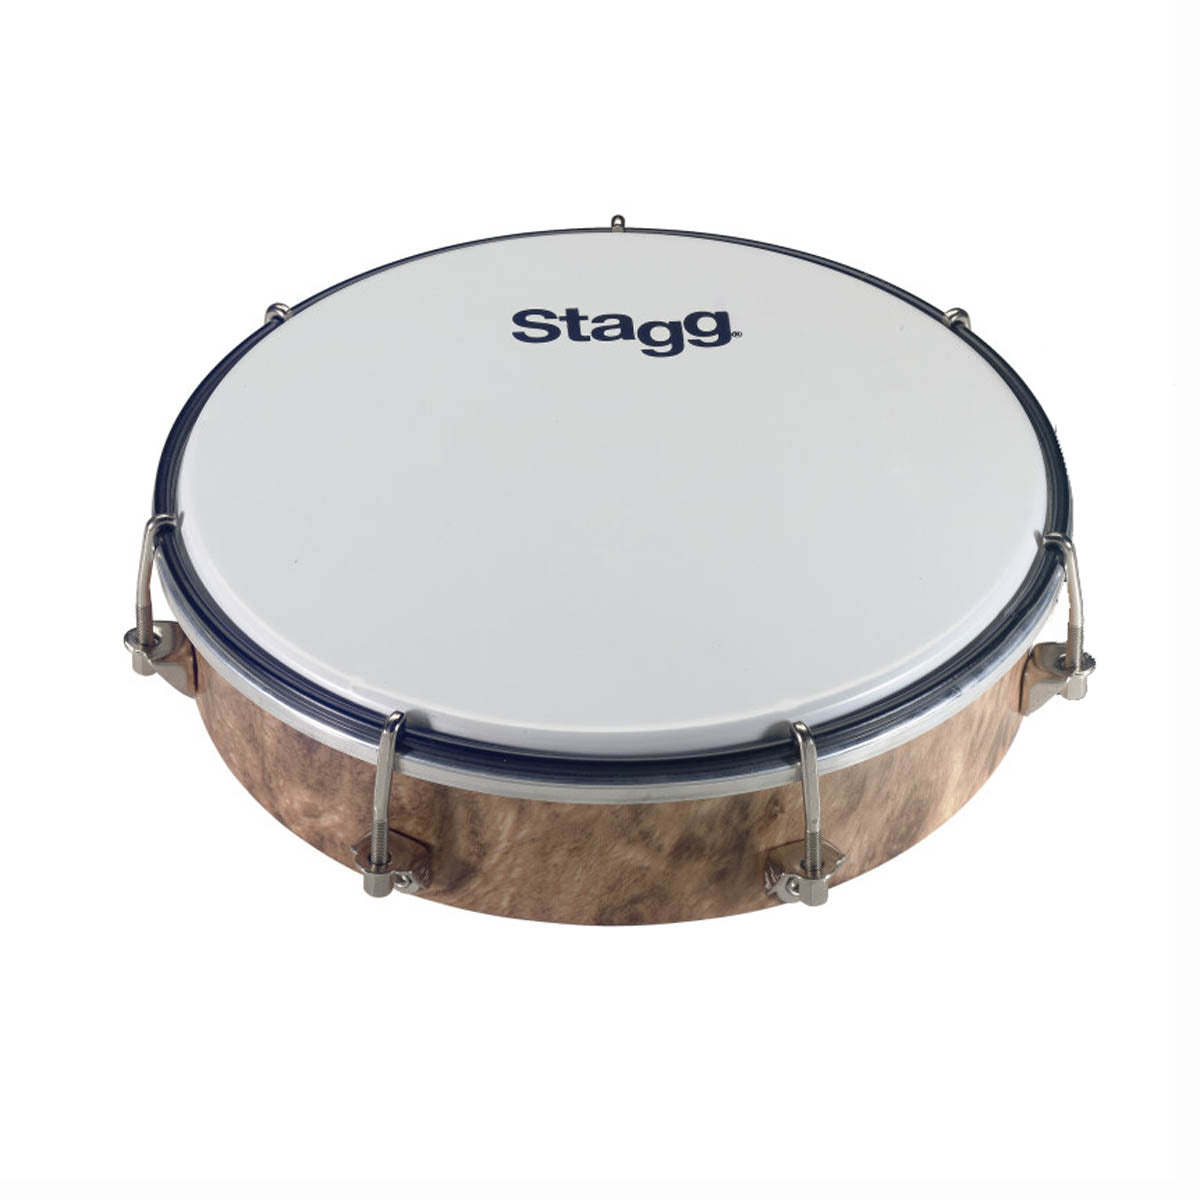 Stagg 8" Tuneable Frame Drum